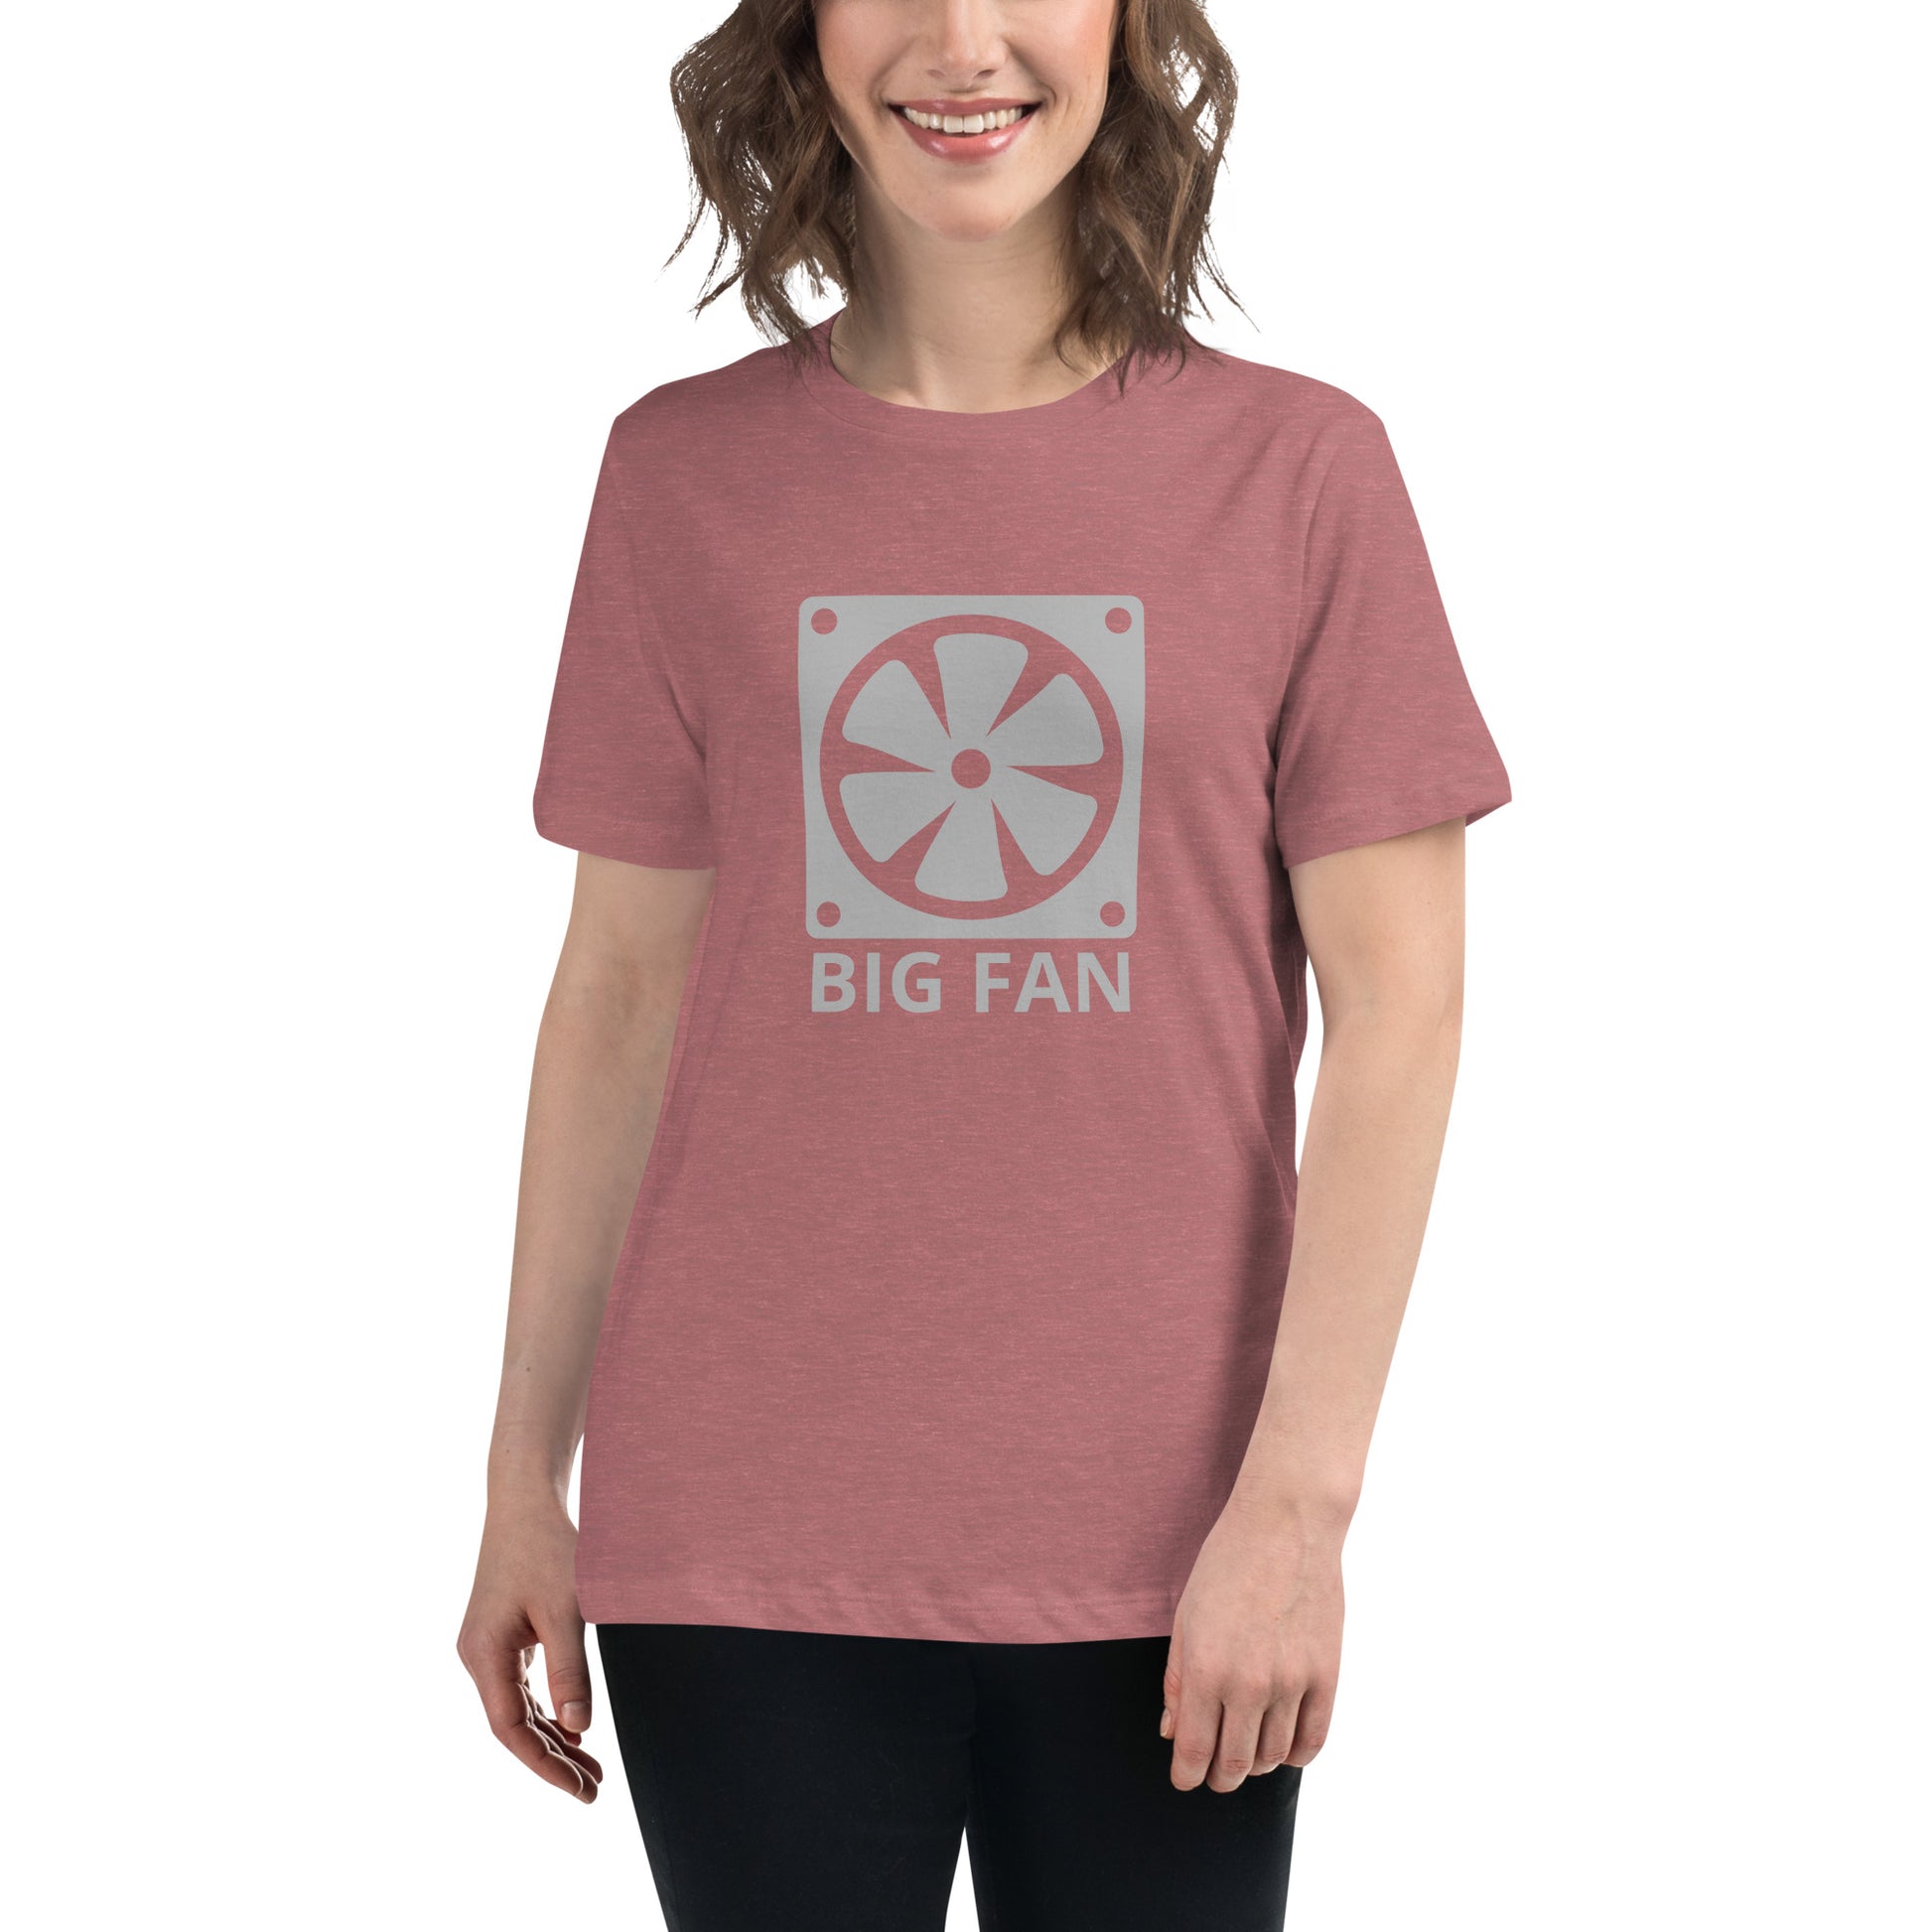 Women with mauve t-shirt with image of a big computer fan and the text "BIG FAN"